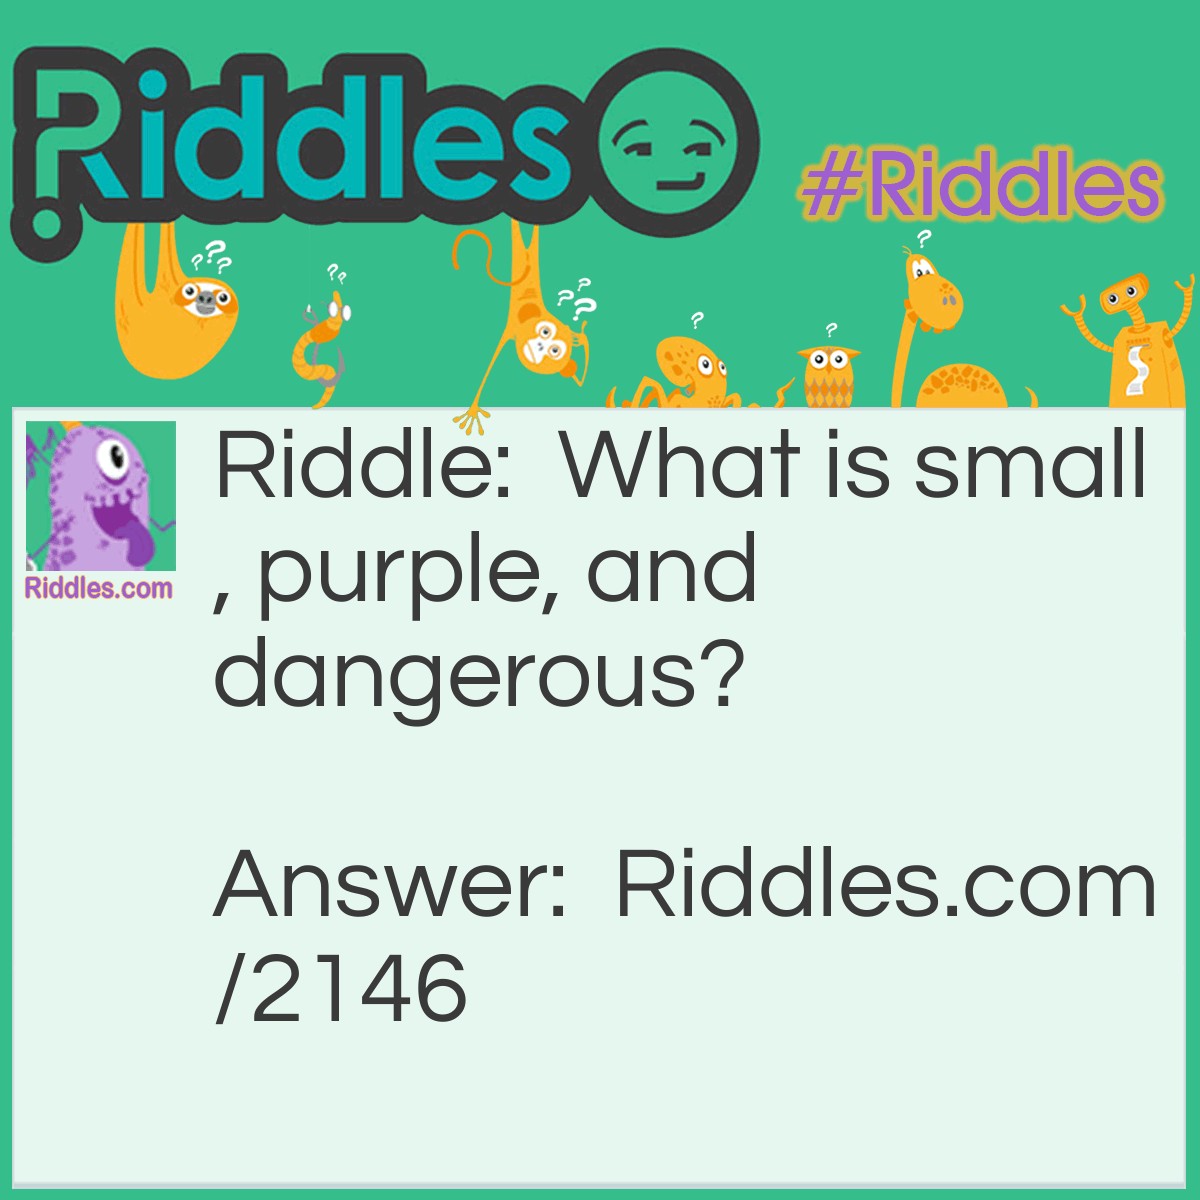 Riddle: What is small, purple, and dangerous? Answer: A grape with a six-shooter.